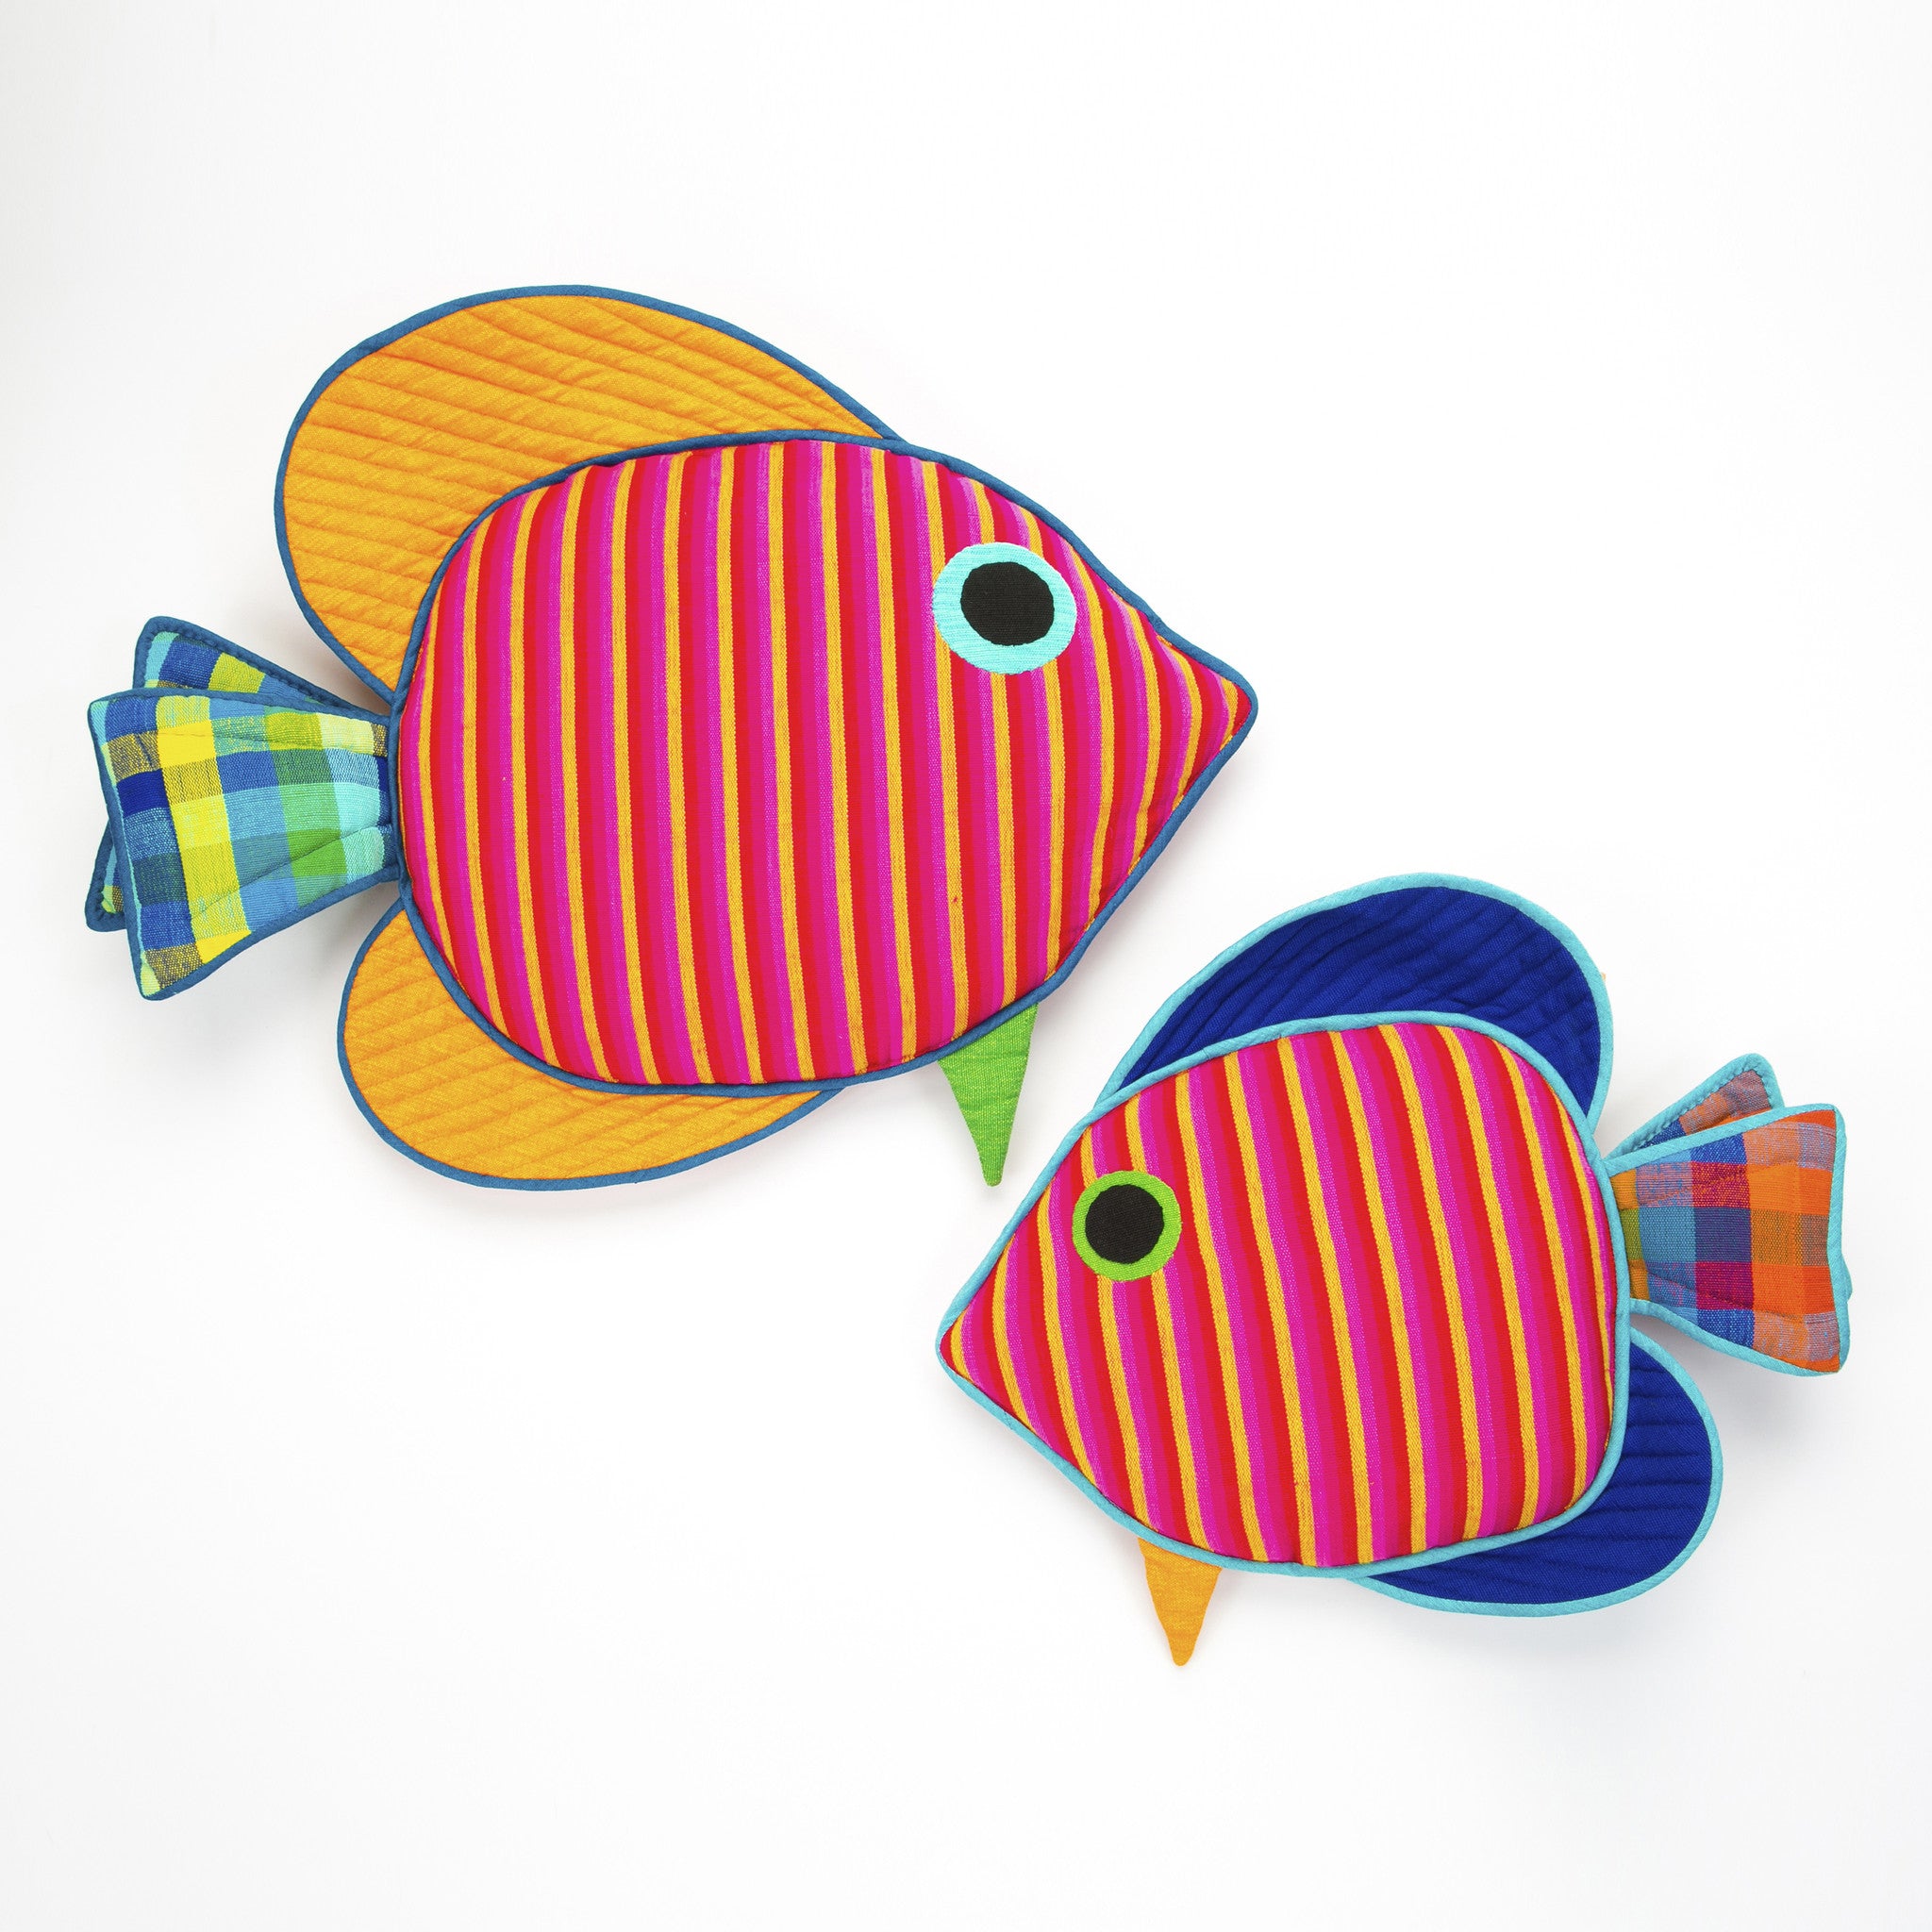 Abigail, the Sail Fin Fish (small & large sizes)